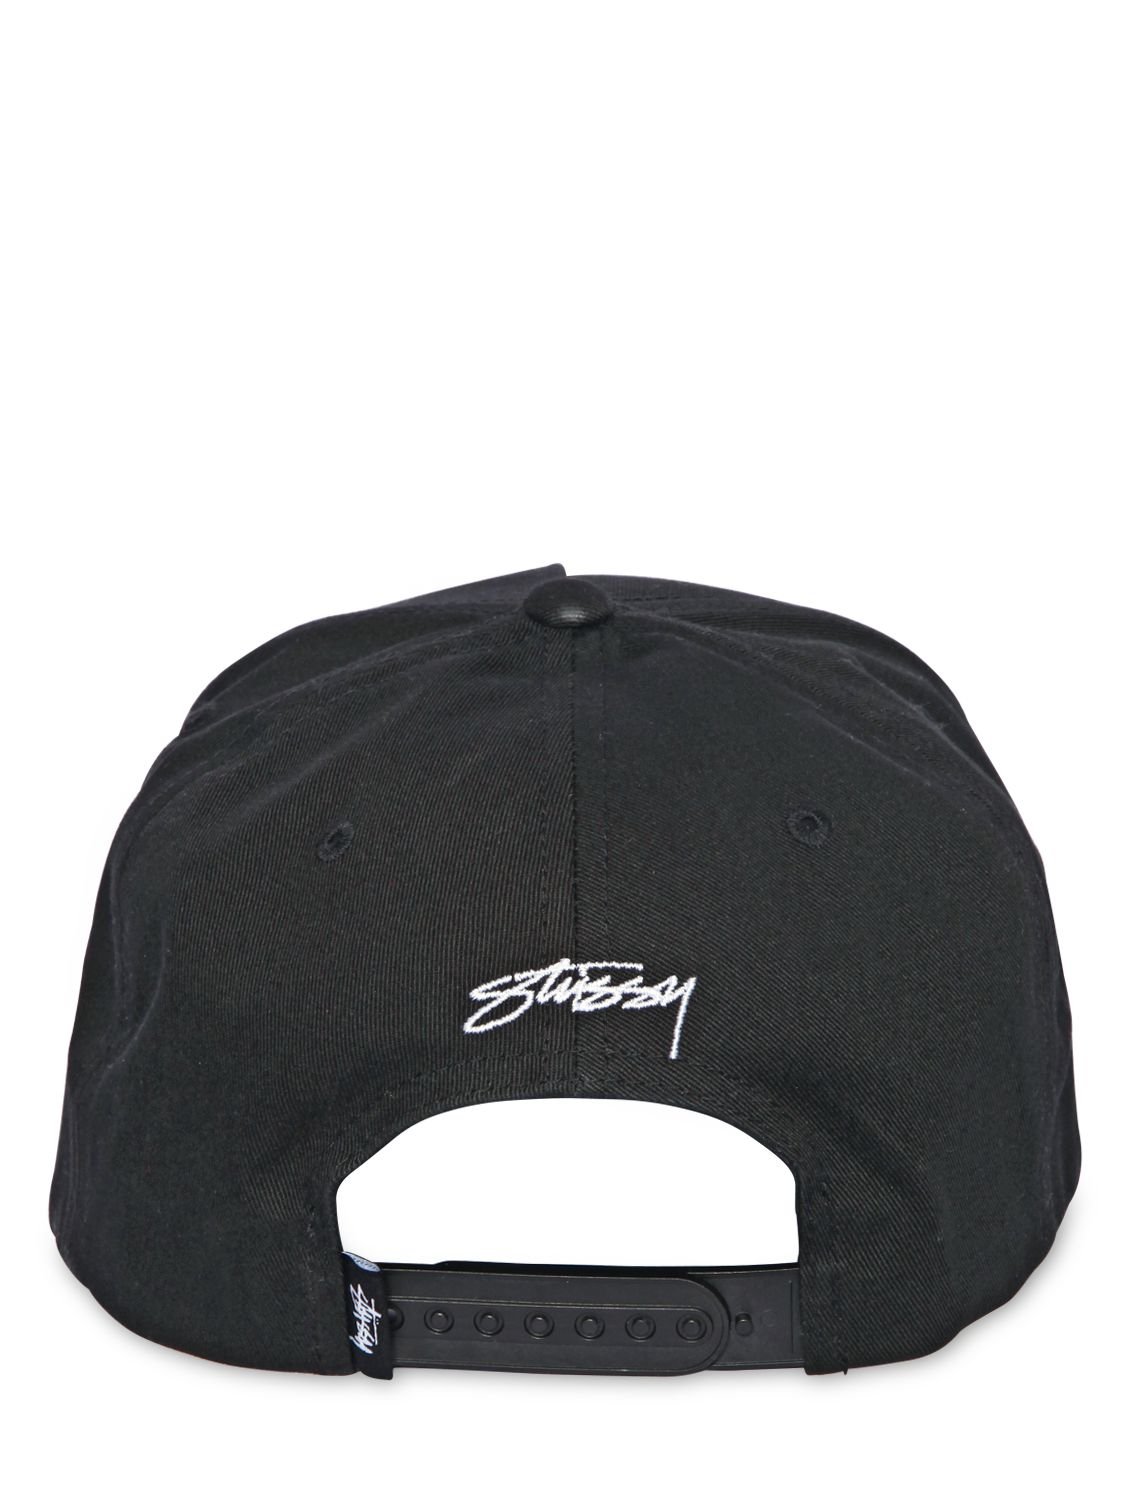 Stussy 8 Ball Embroidered Cotton Hat in Black for Men - Lyst